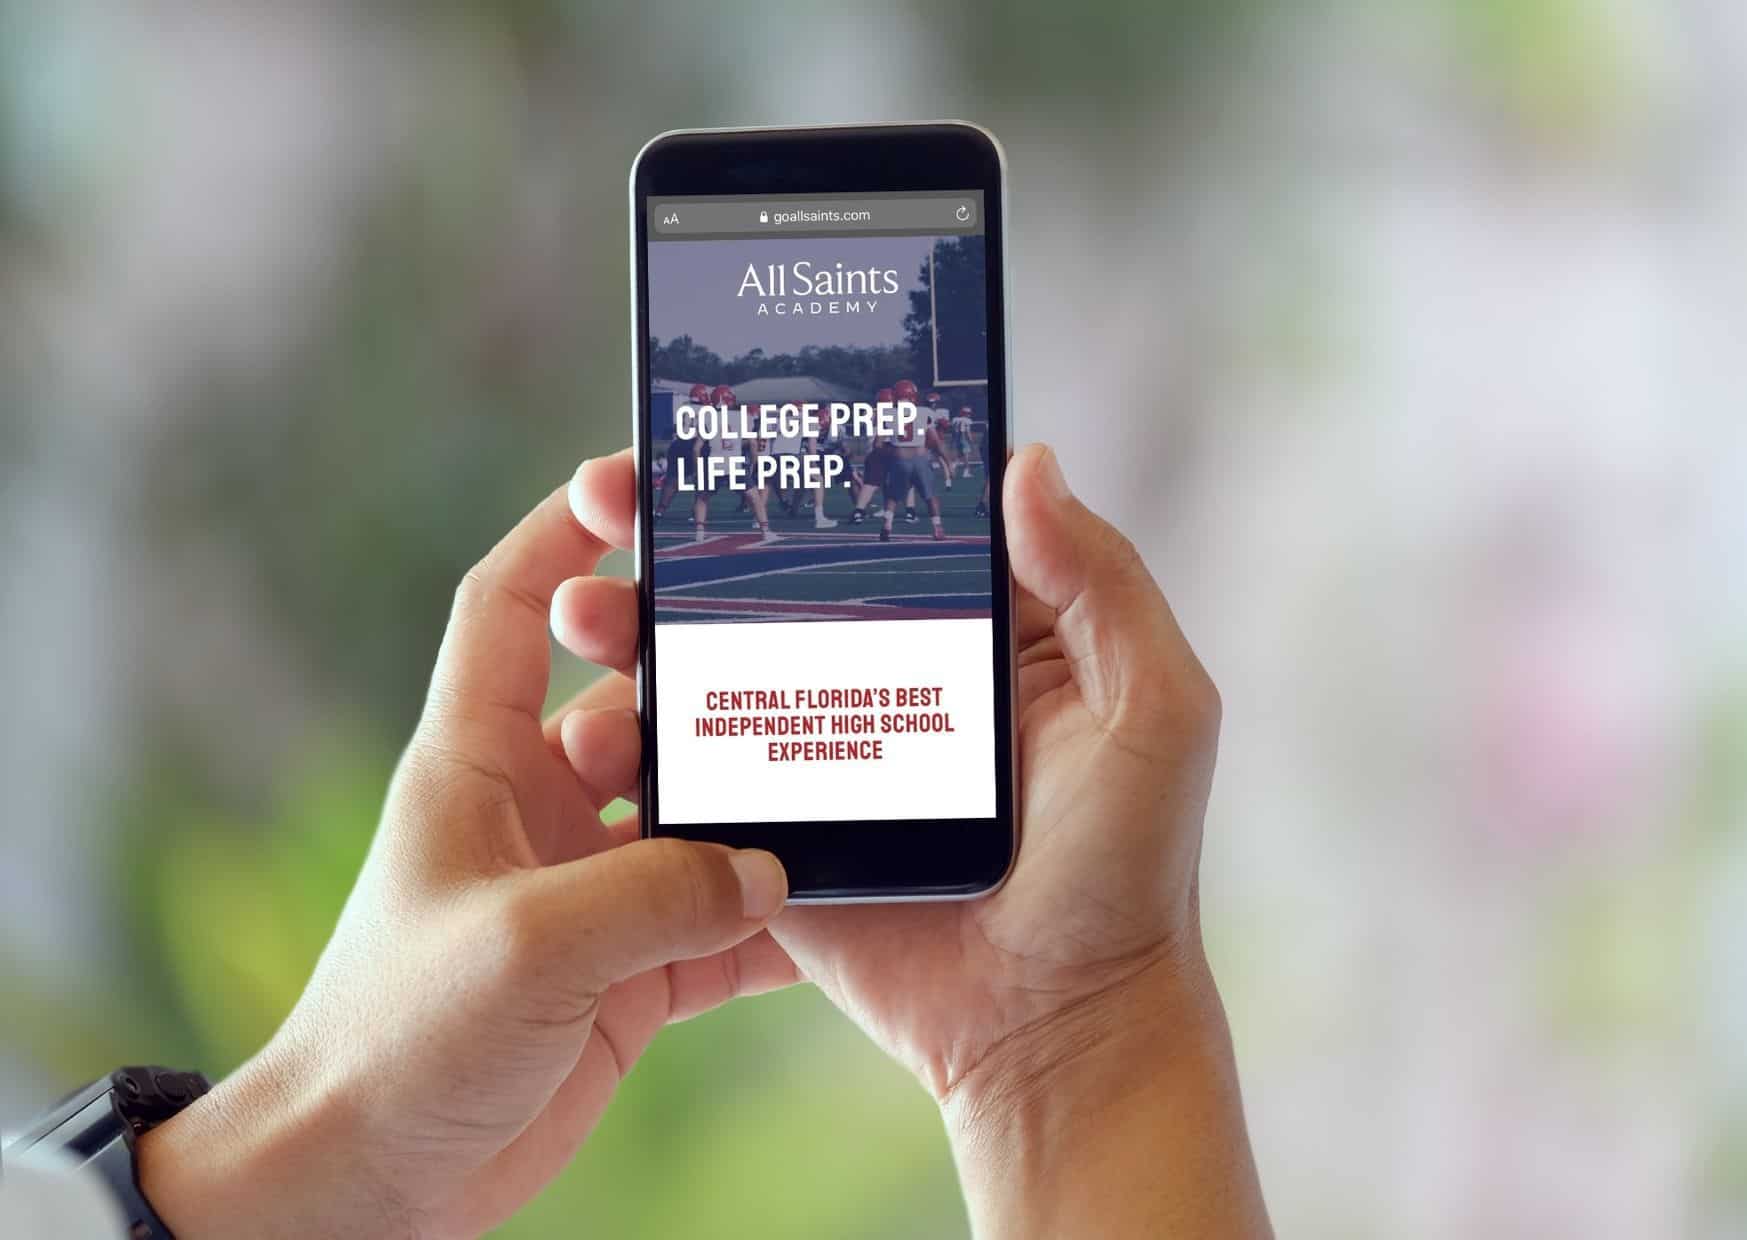 Mobile-Friendly Microsite for All Saints Academy